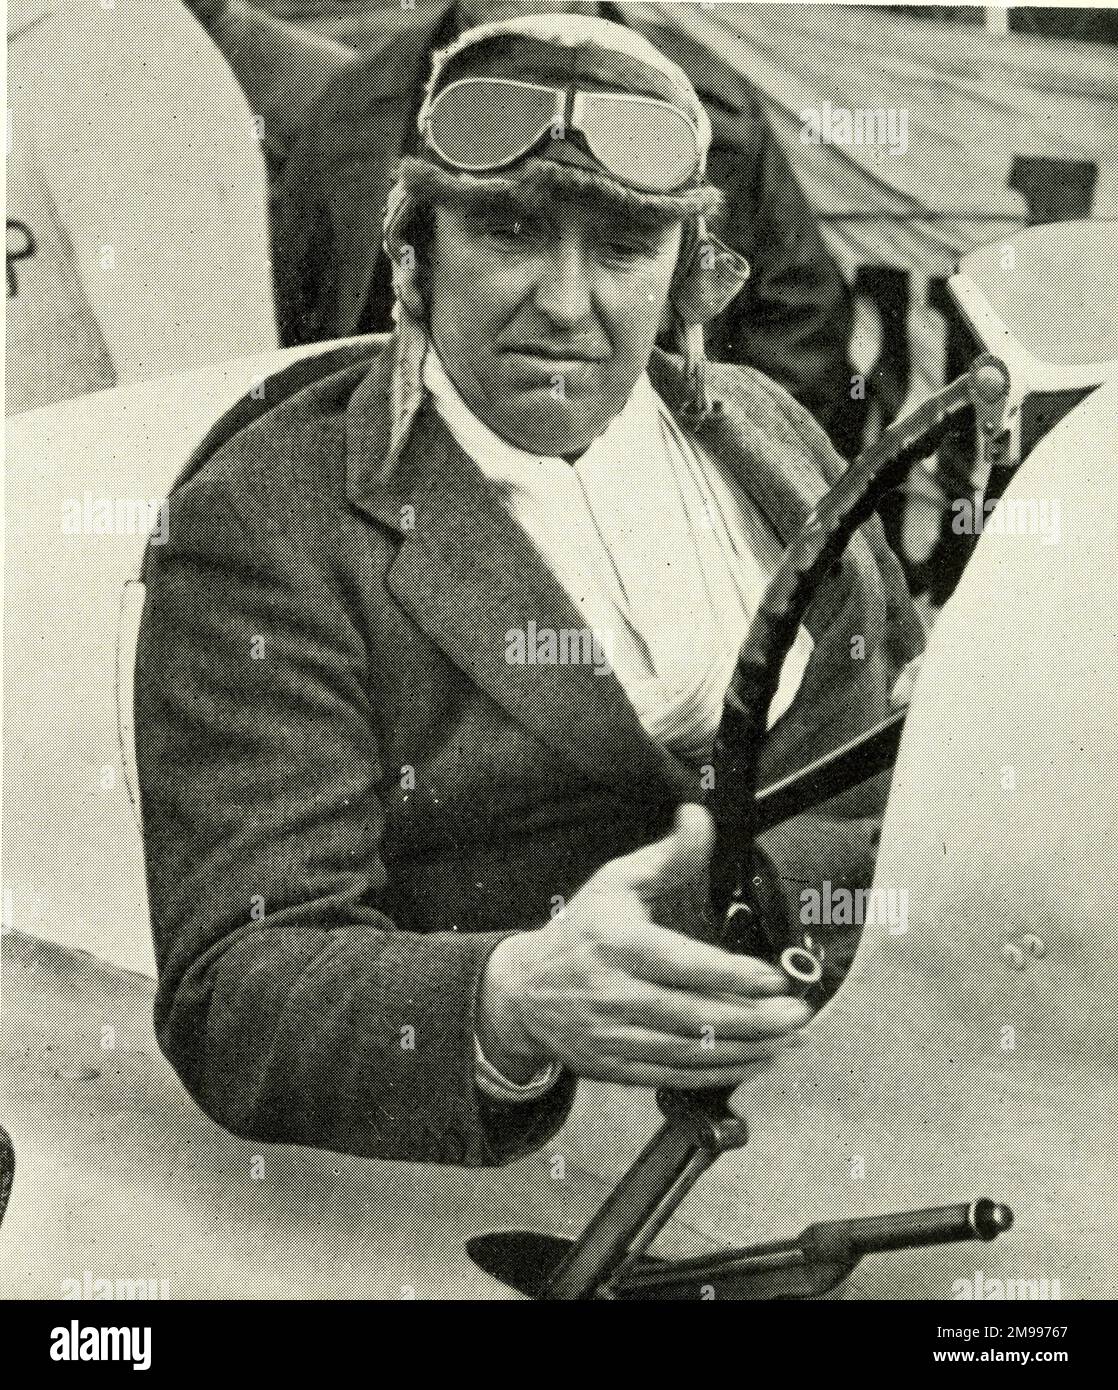 Parry Thomas, motor racing driver, at the wheel of Babs, half an hour before his fatal accident attempting another world speed record at Pendine, Carmarthenshire on 3 March 1928. Stock Photo